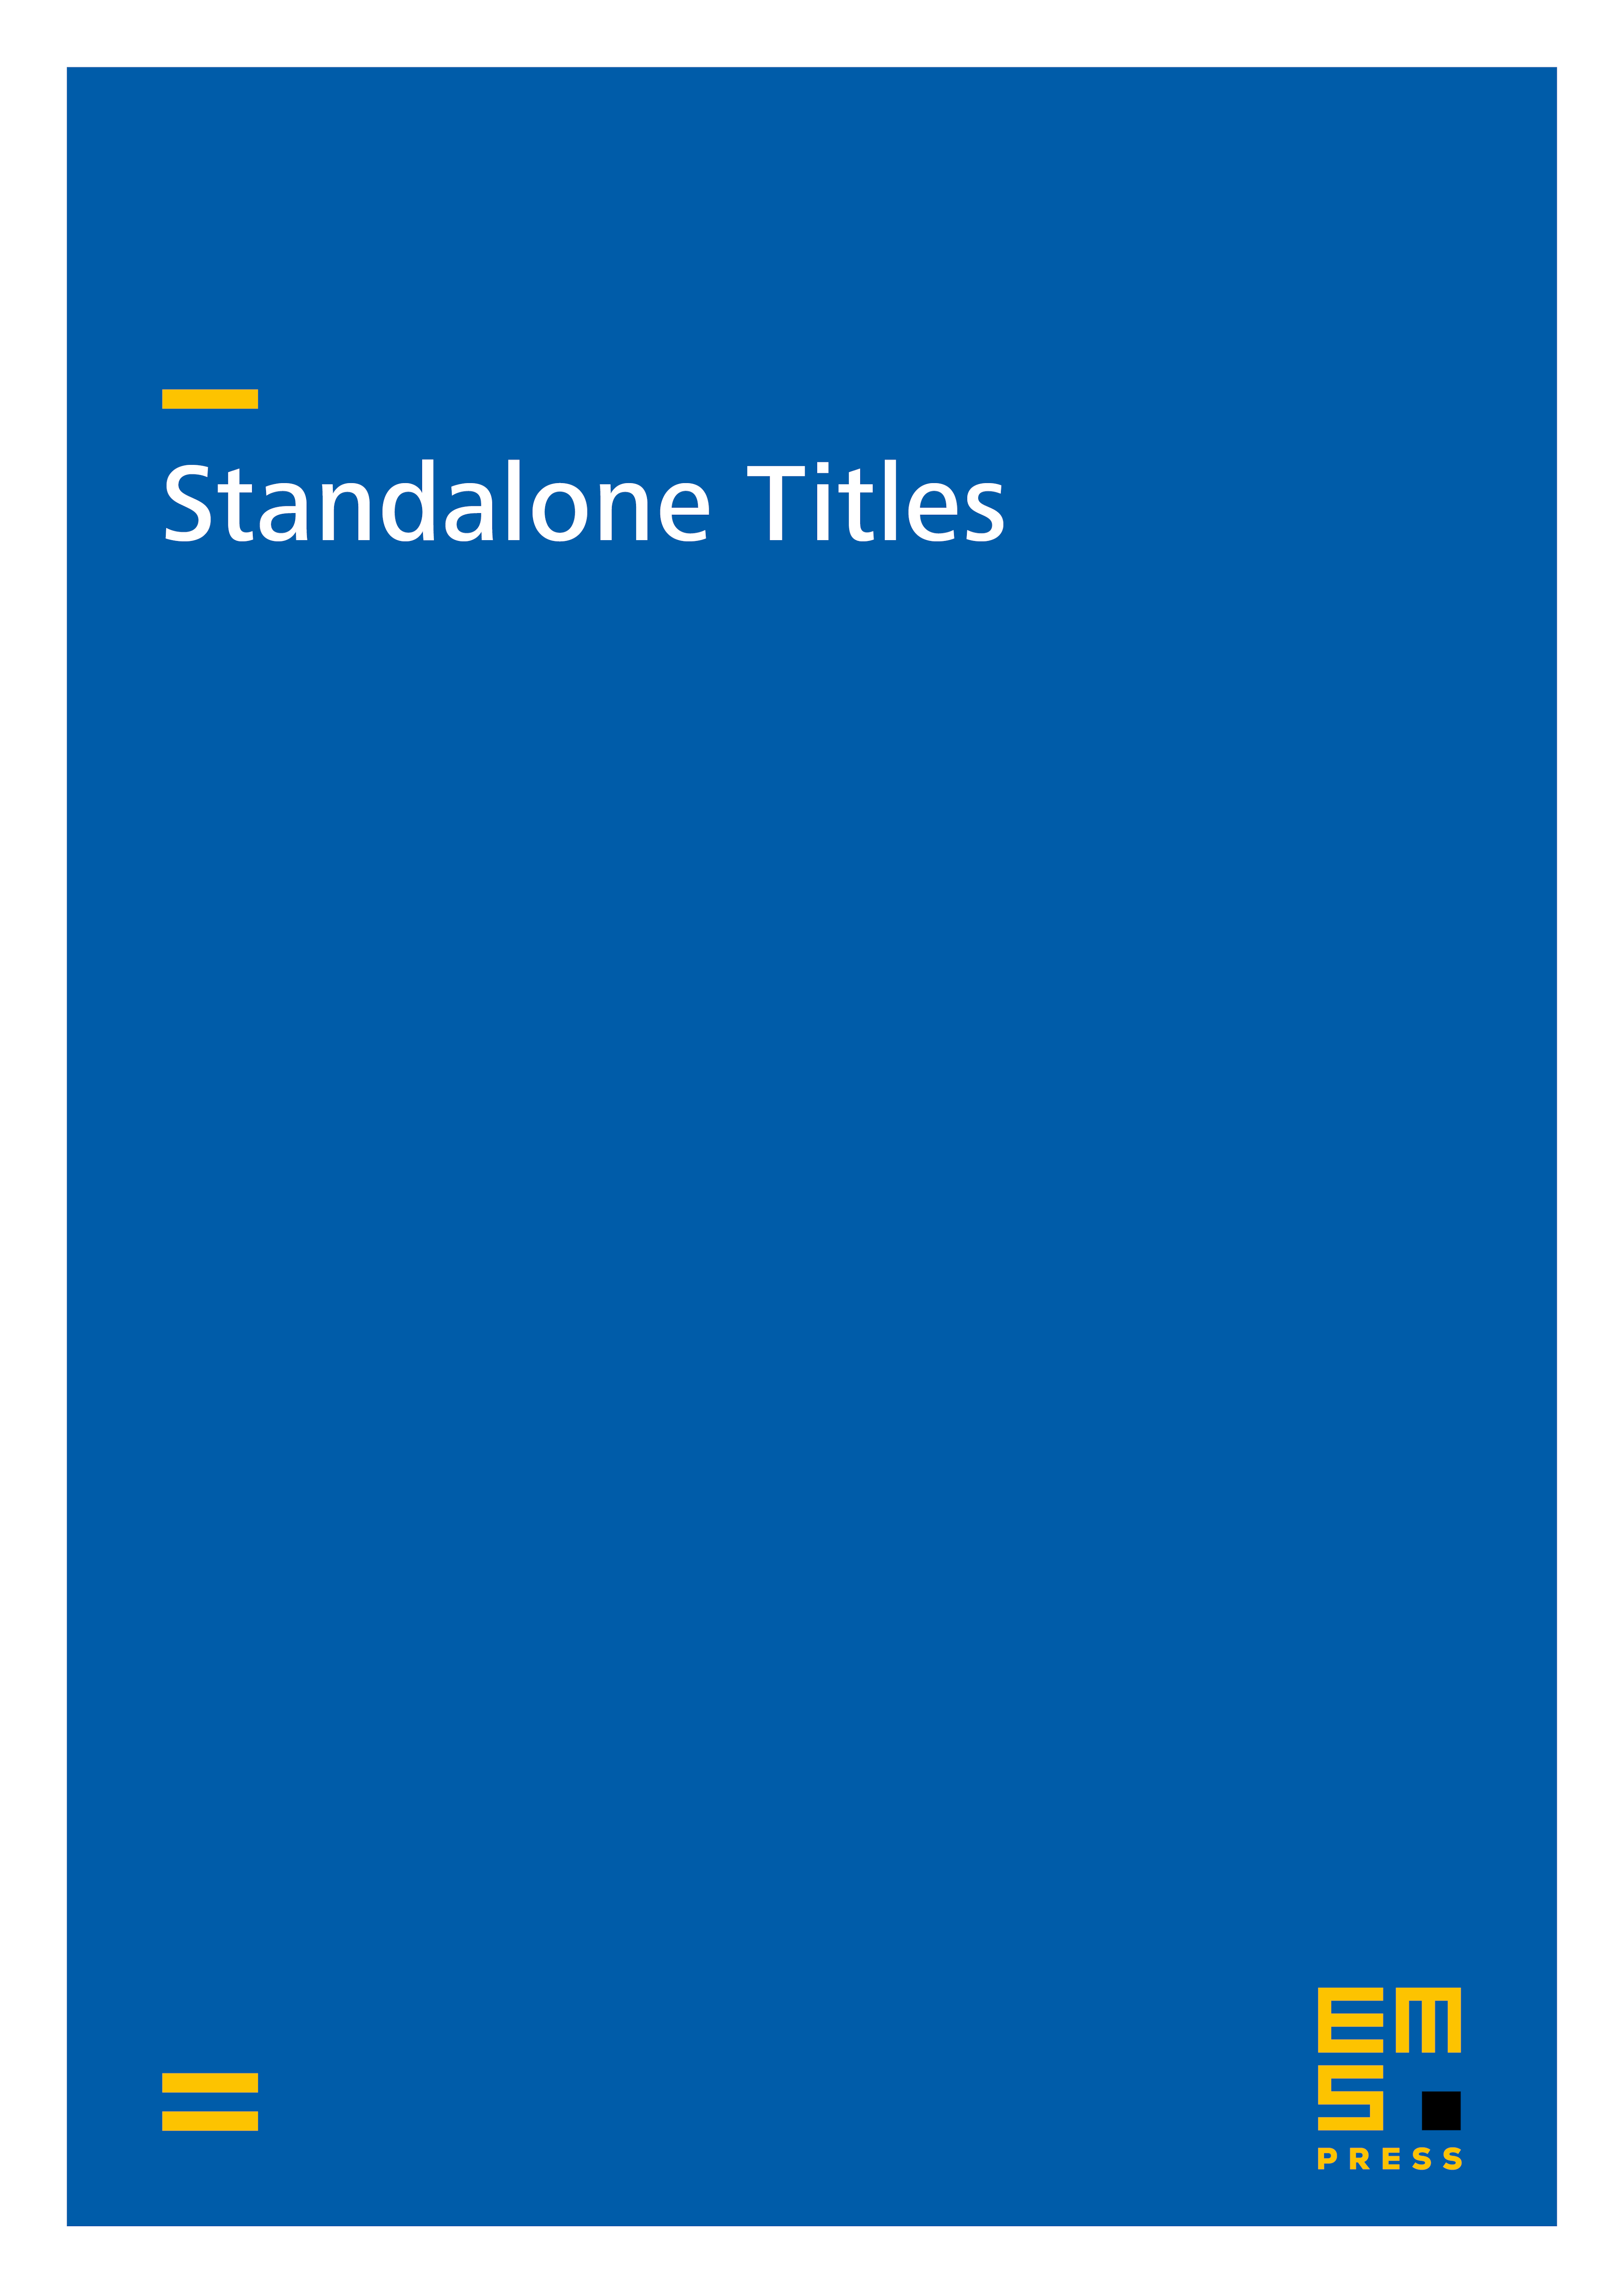 Standalone titles cover